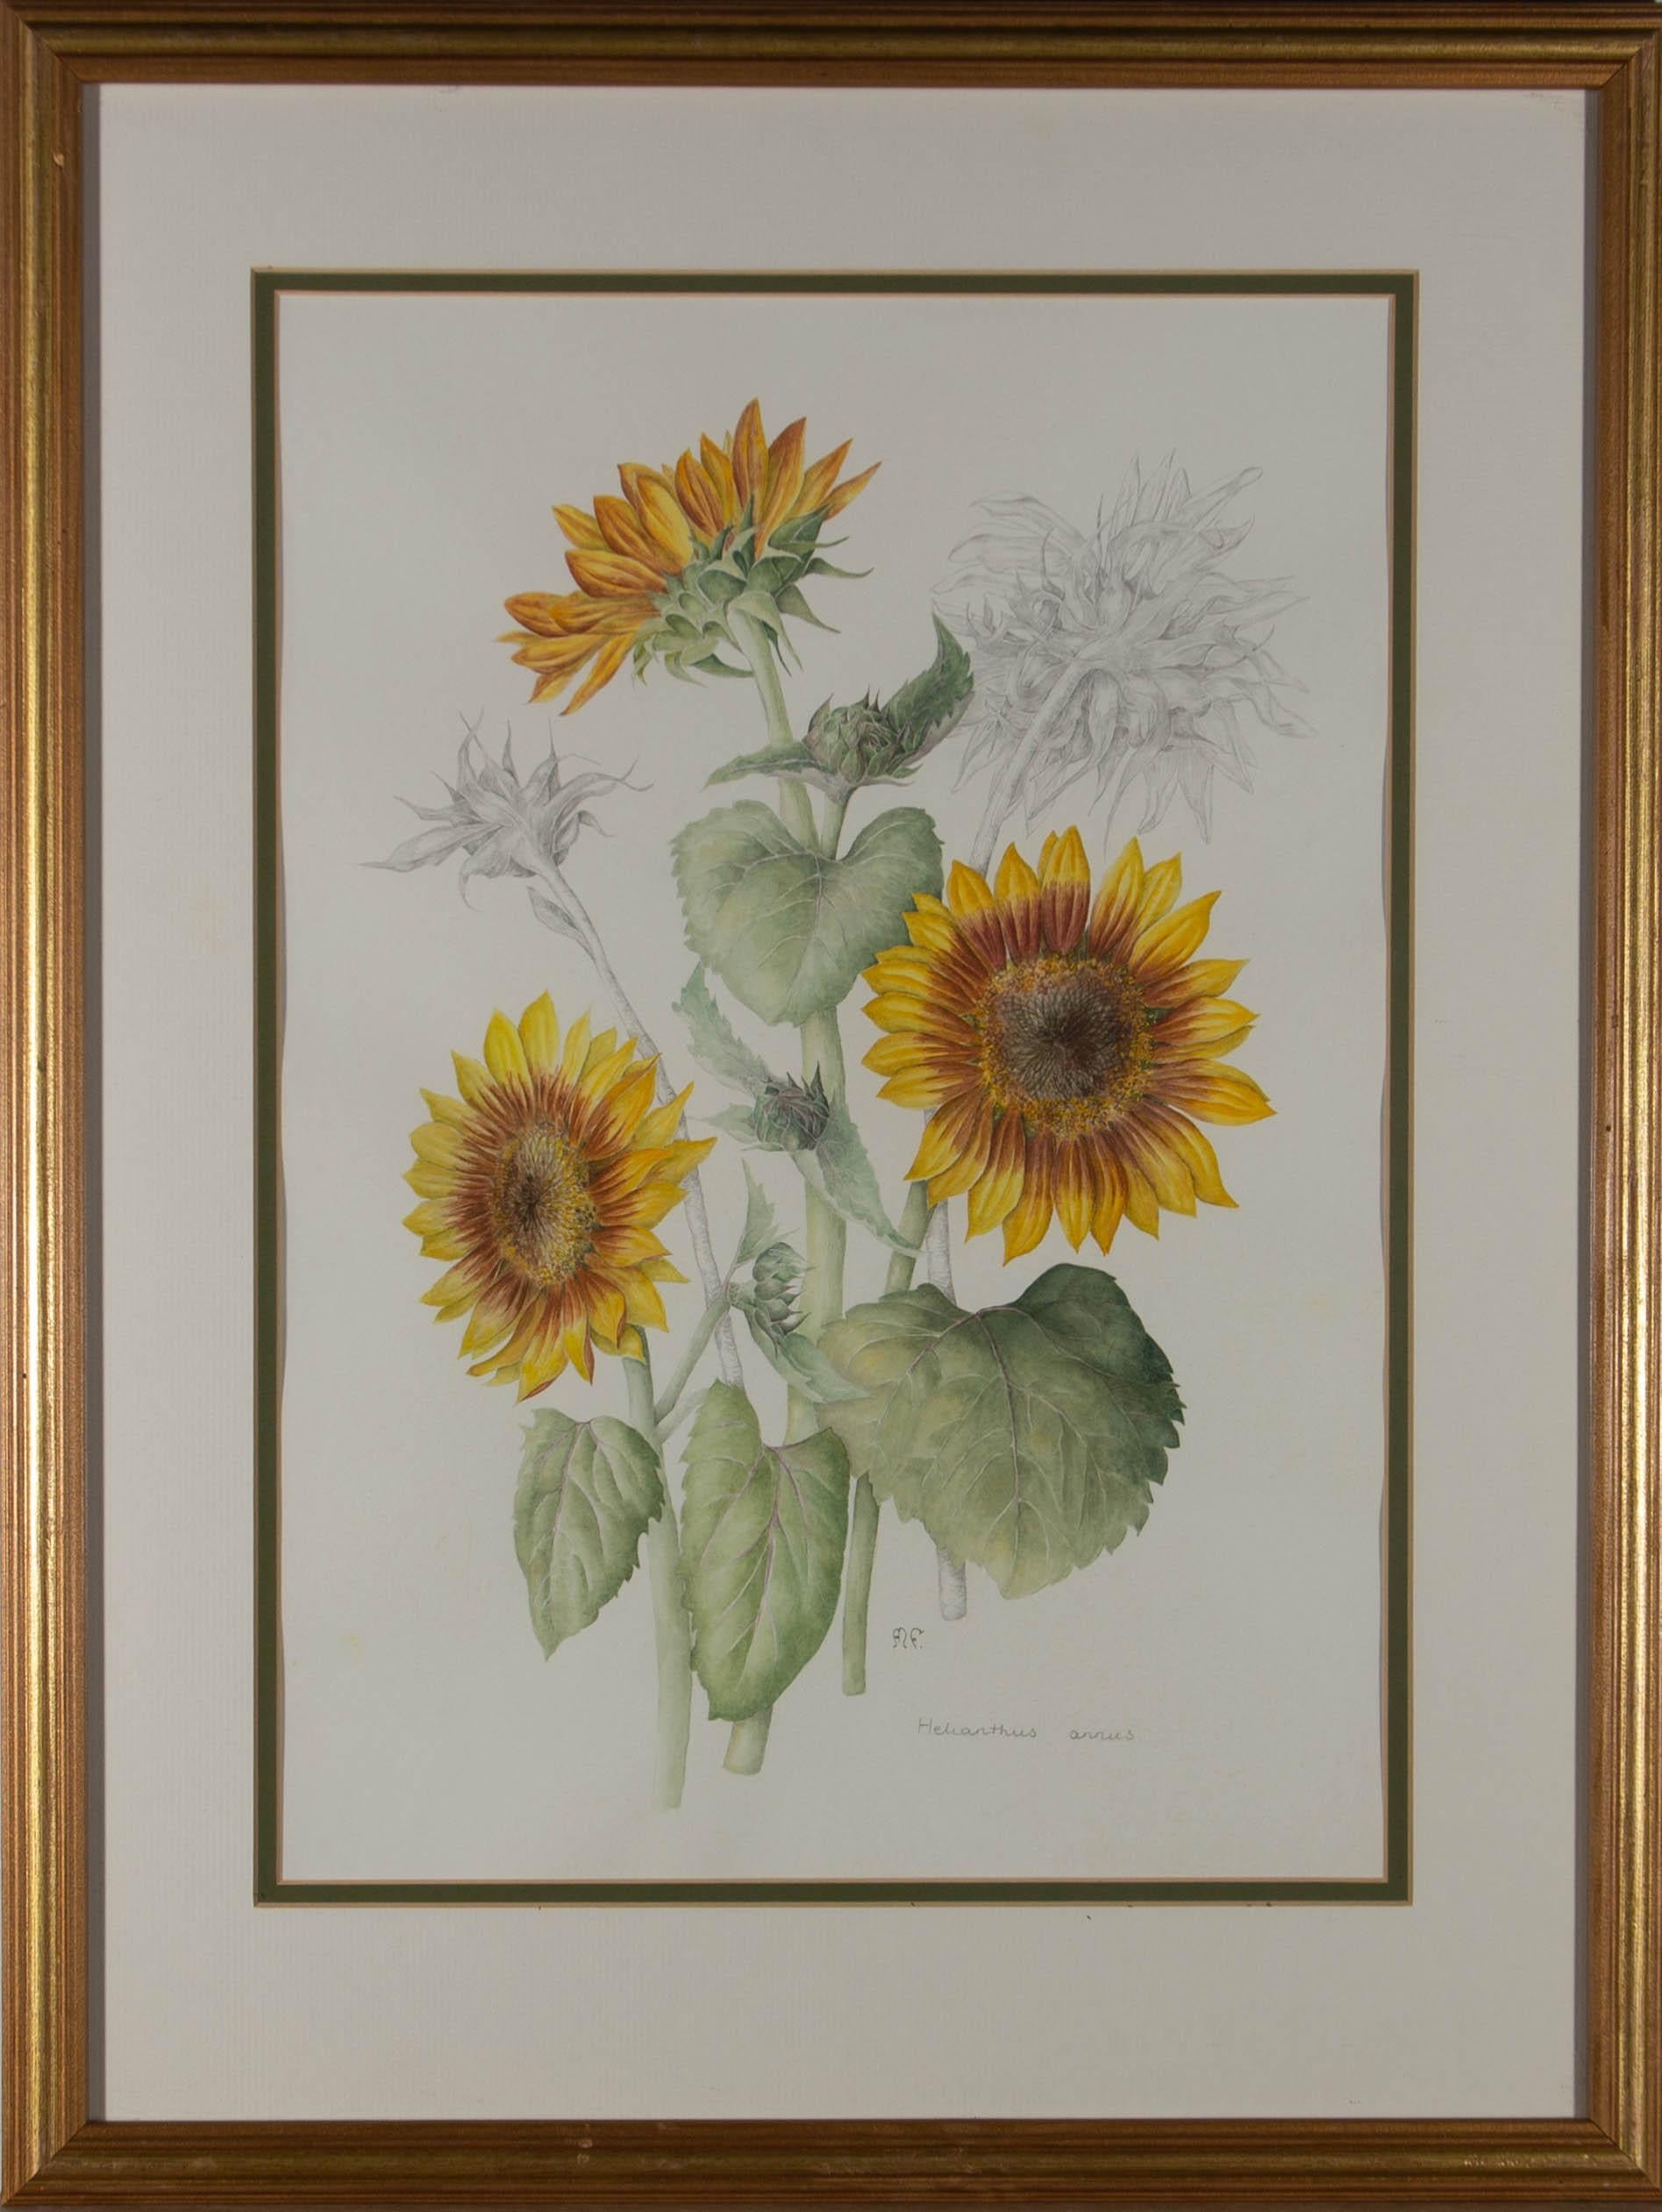 A delicate watercolour study of sunflowers in bloom which has been intertwined with similar graphite studies of the flower in its later stages. It has been presented in a double card mount and gilt effect frame. Initialled by the artist in the lower